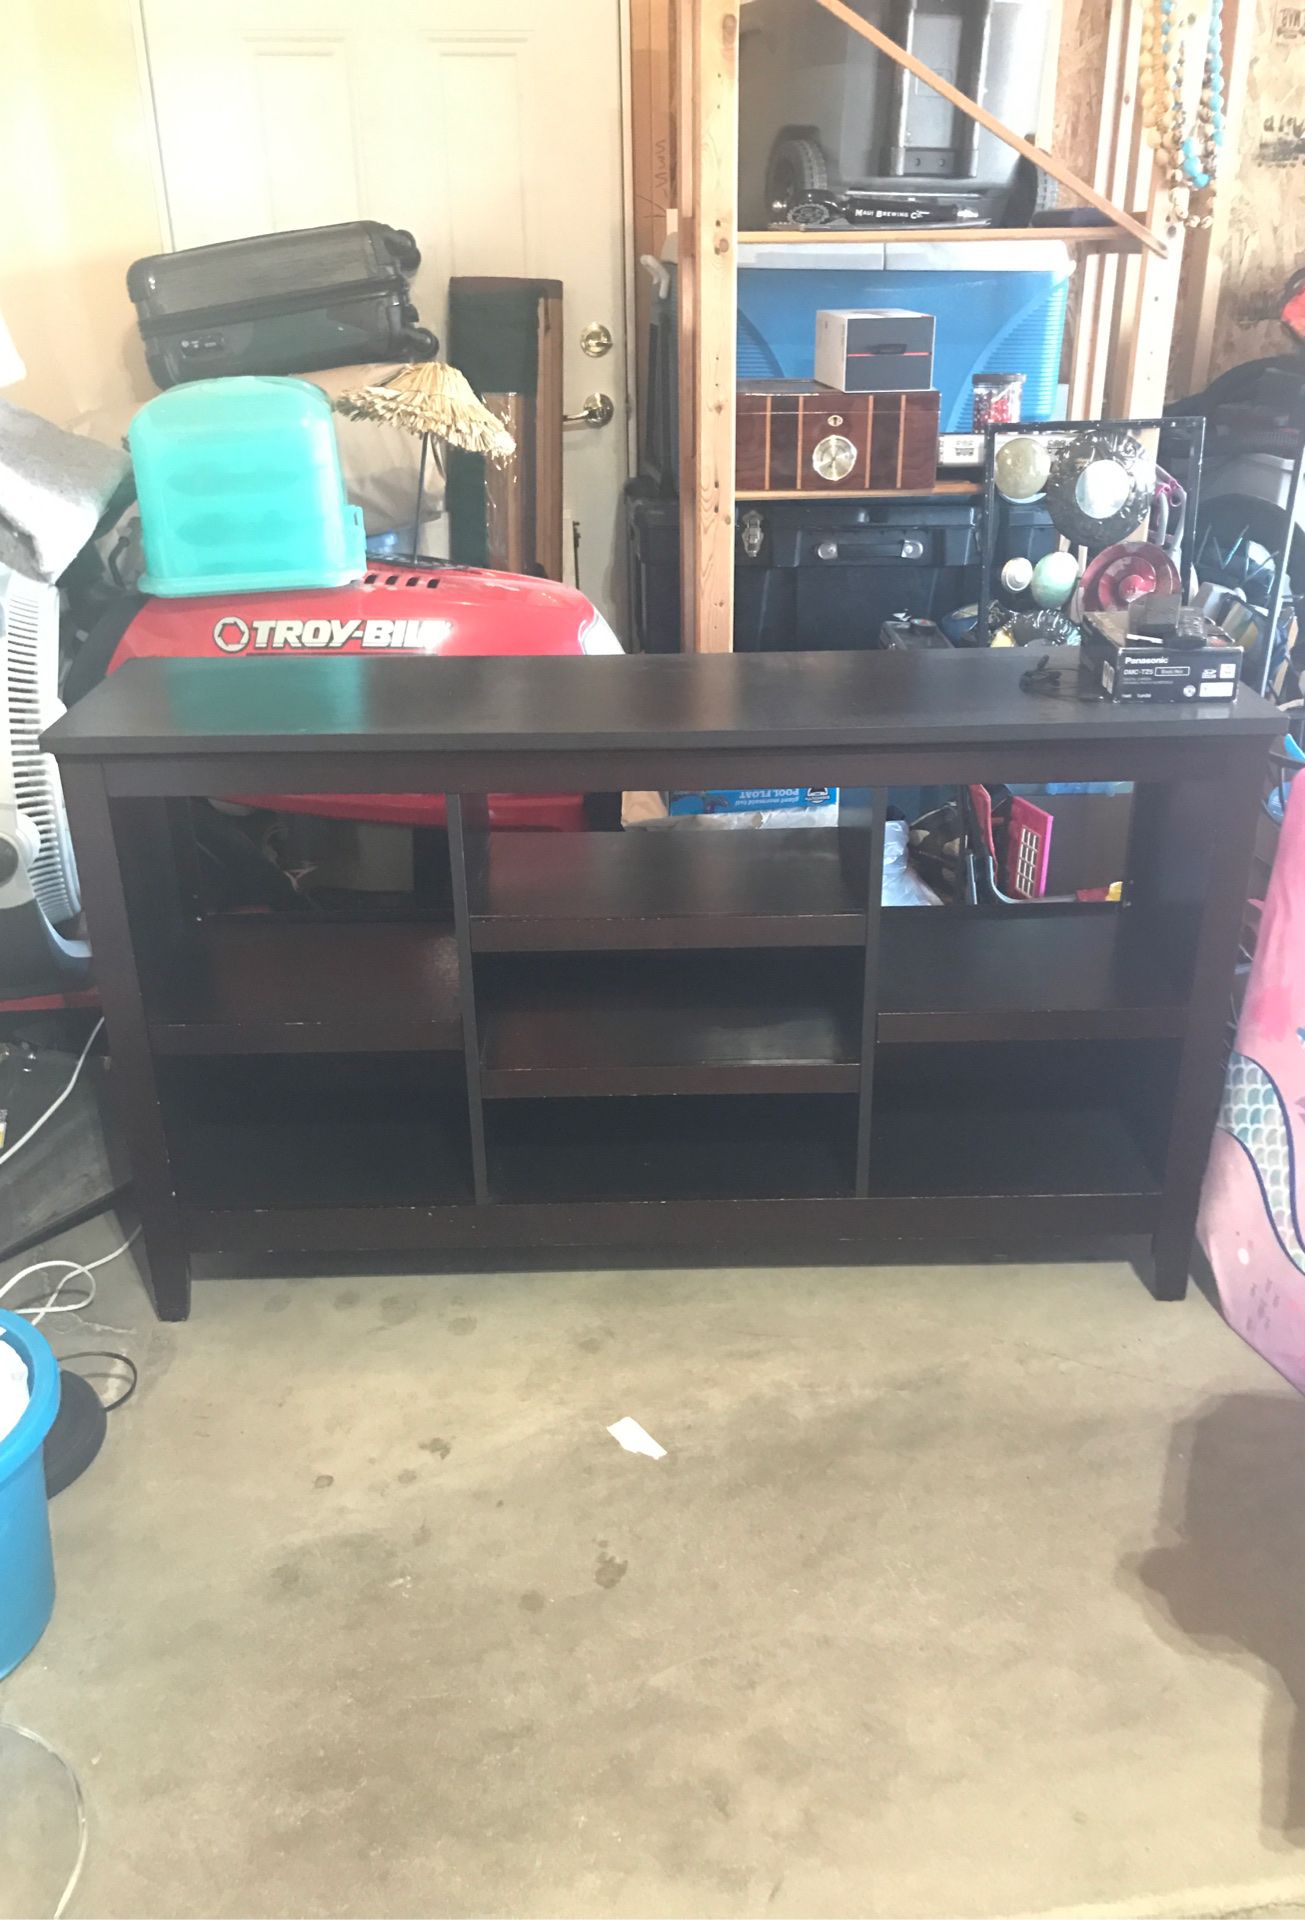 Tv stand with shelves